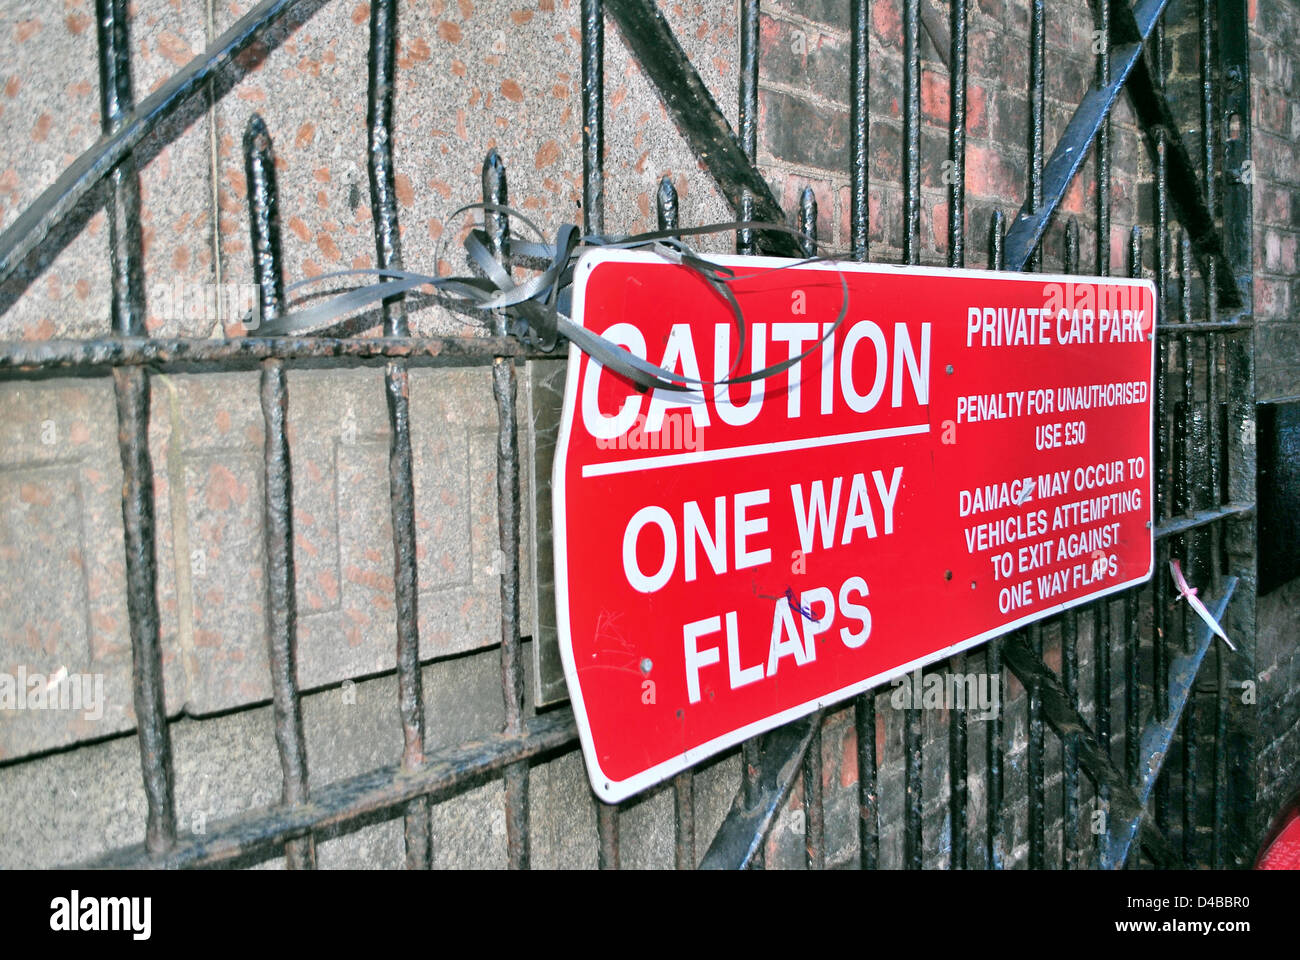 One way flaps street sign Stock Photo